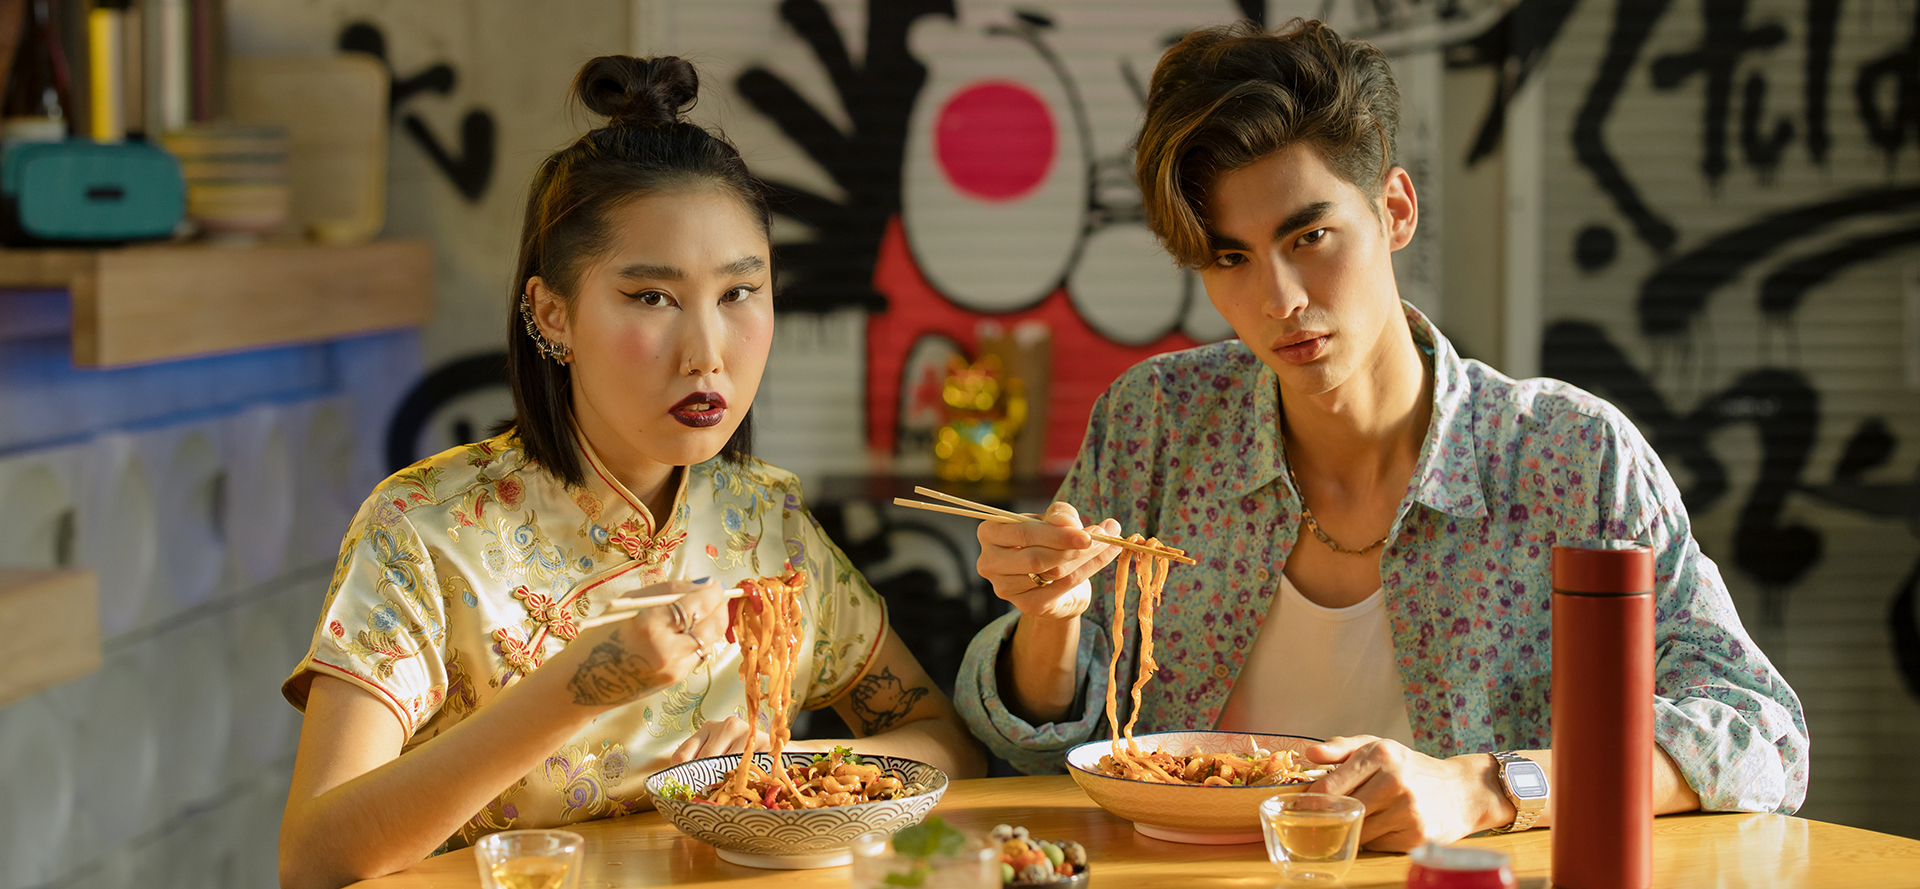 A Chinese couple on a date eating noodles.